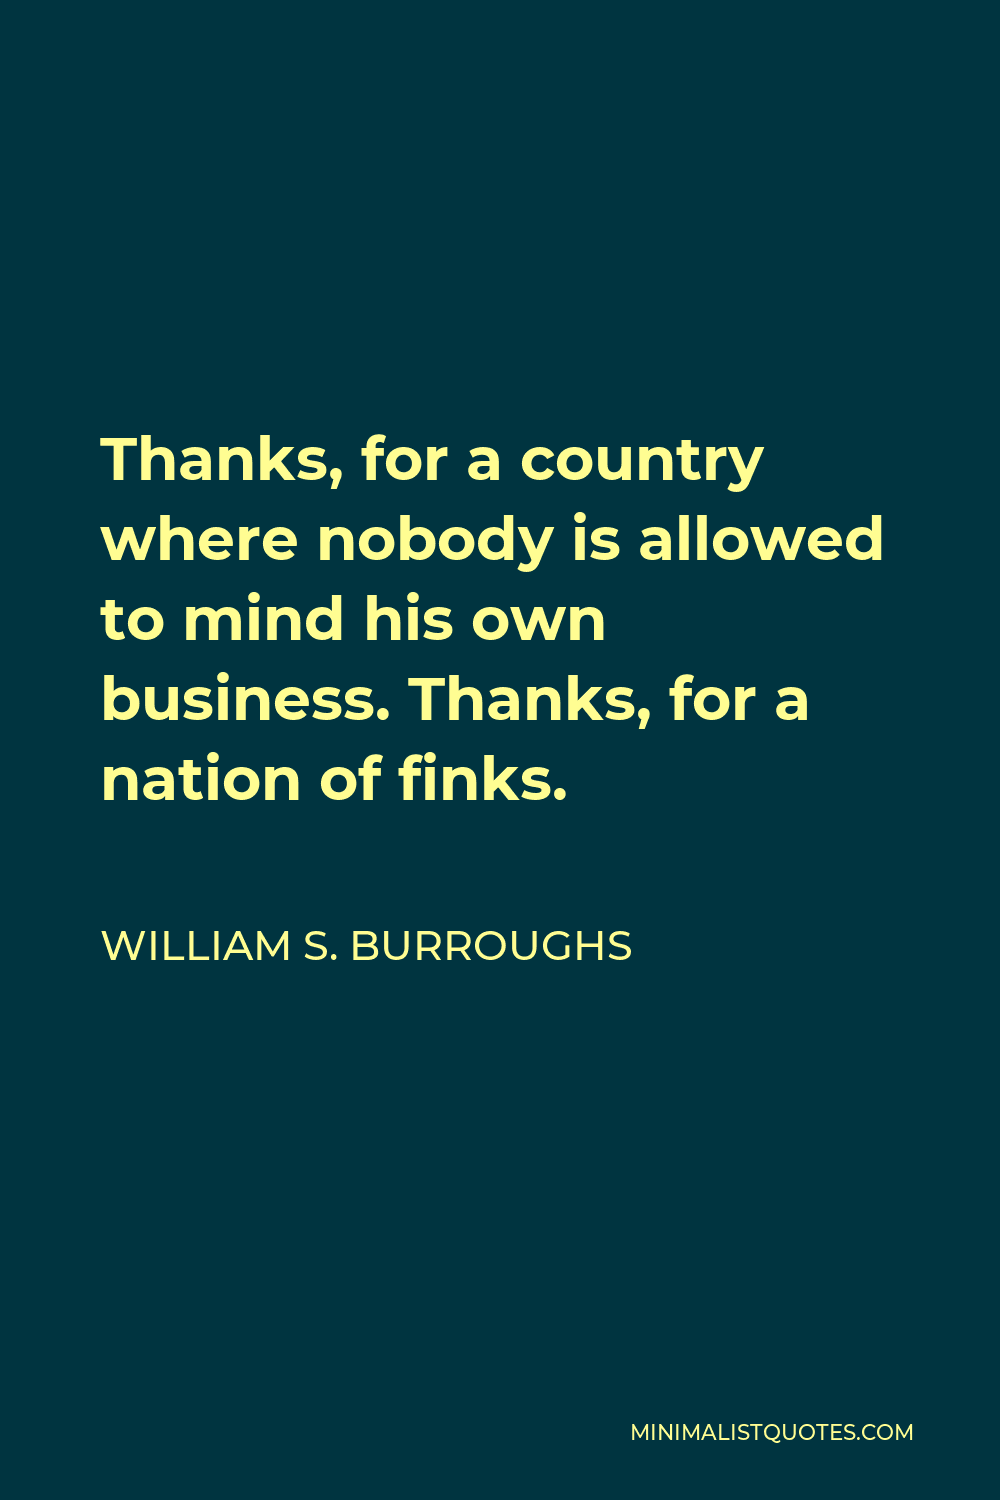 William S. Burroughs Quote - Thanks, for a country where nobody is allowed to mind his own business. Thanks, for a nation of finks.